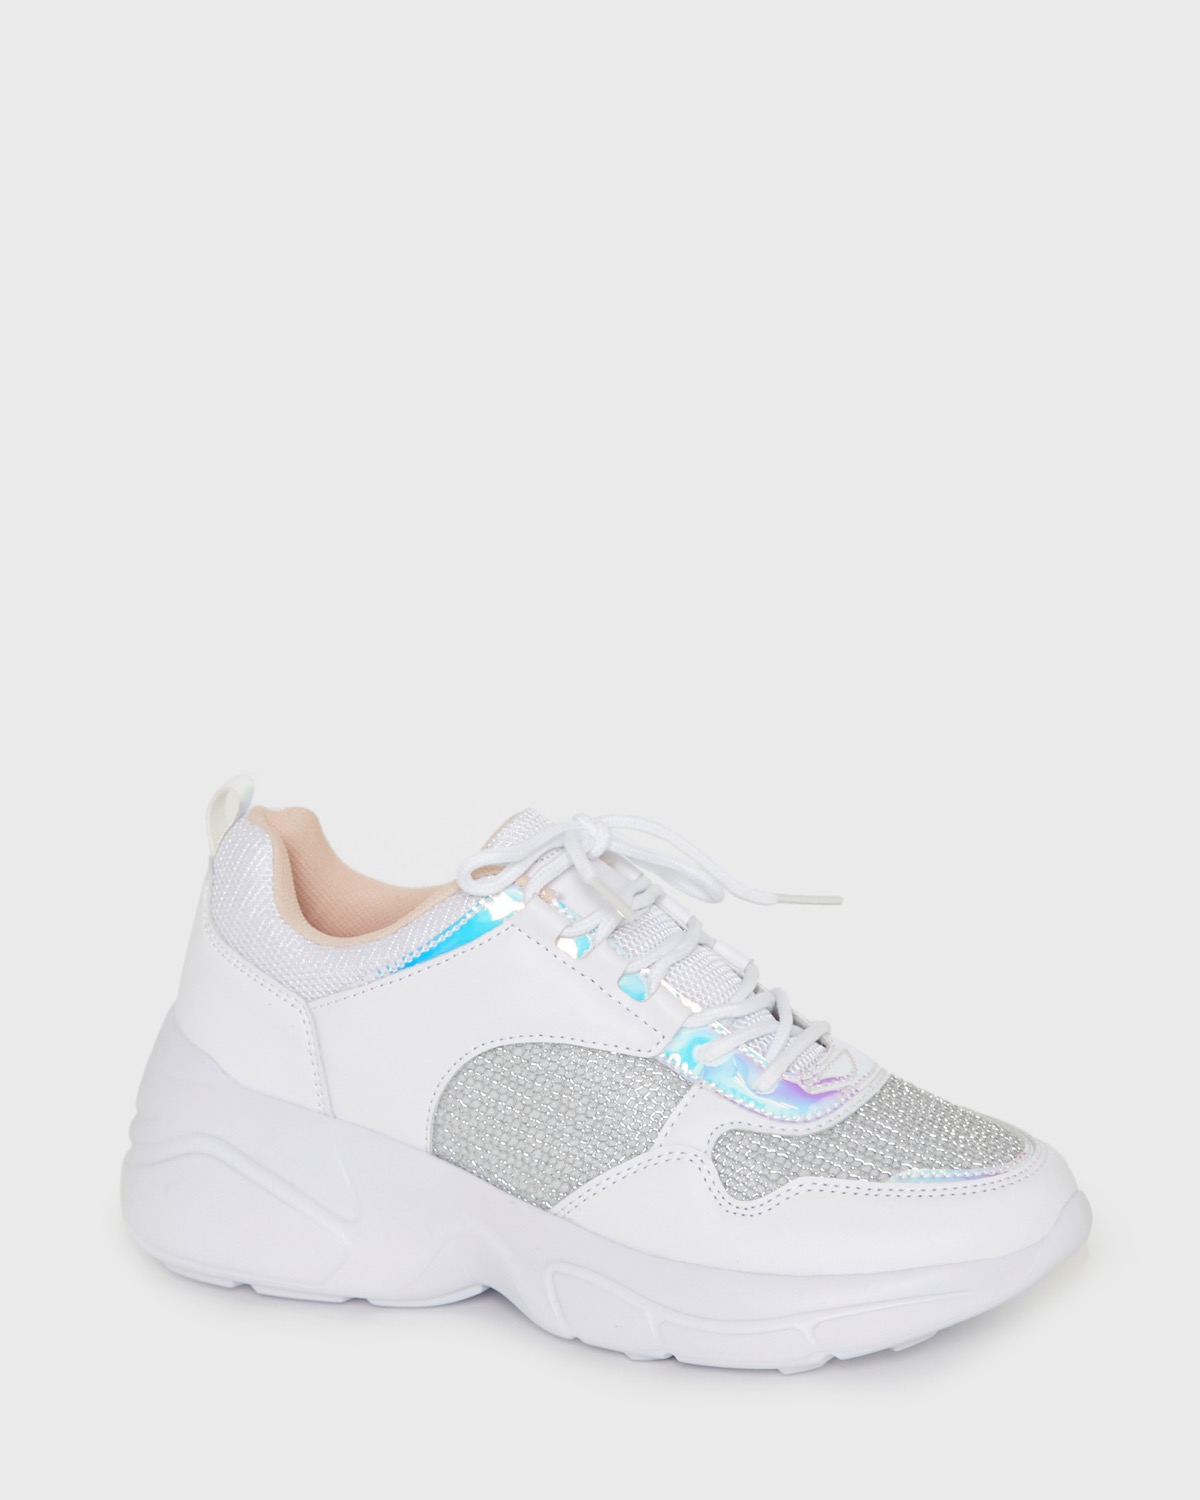 Holographic Decor Knit Decor Chunky Sneakers | SHEIN IN